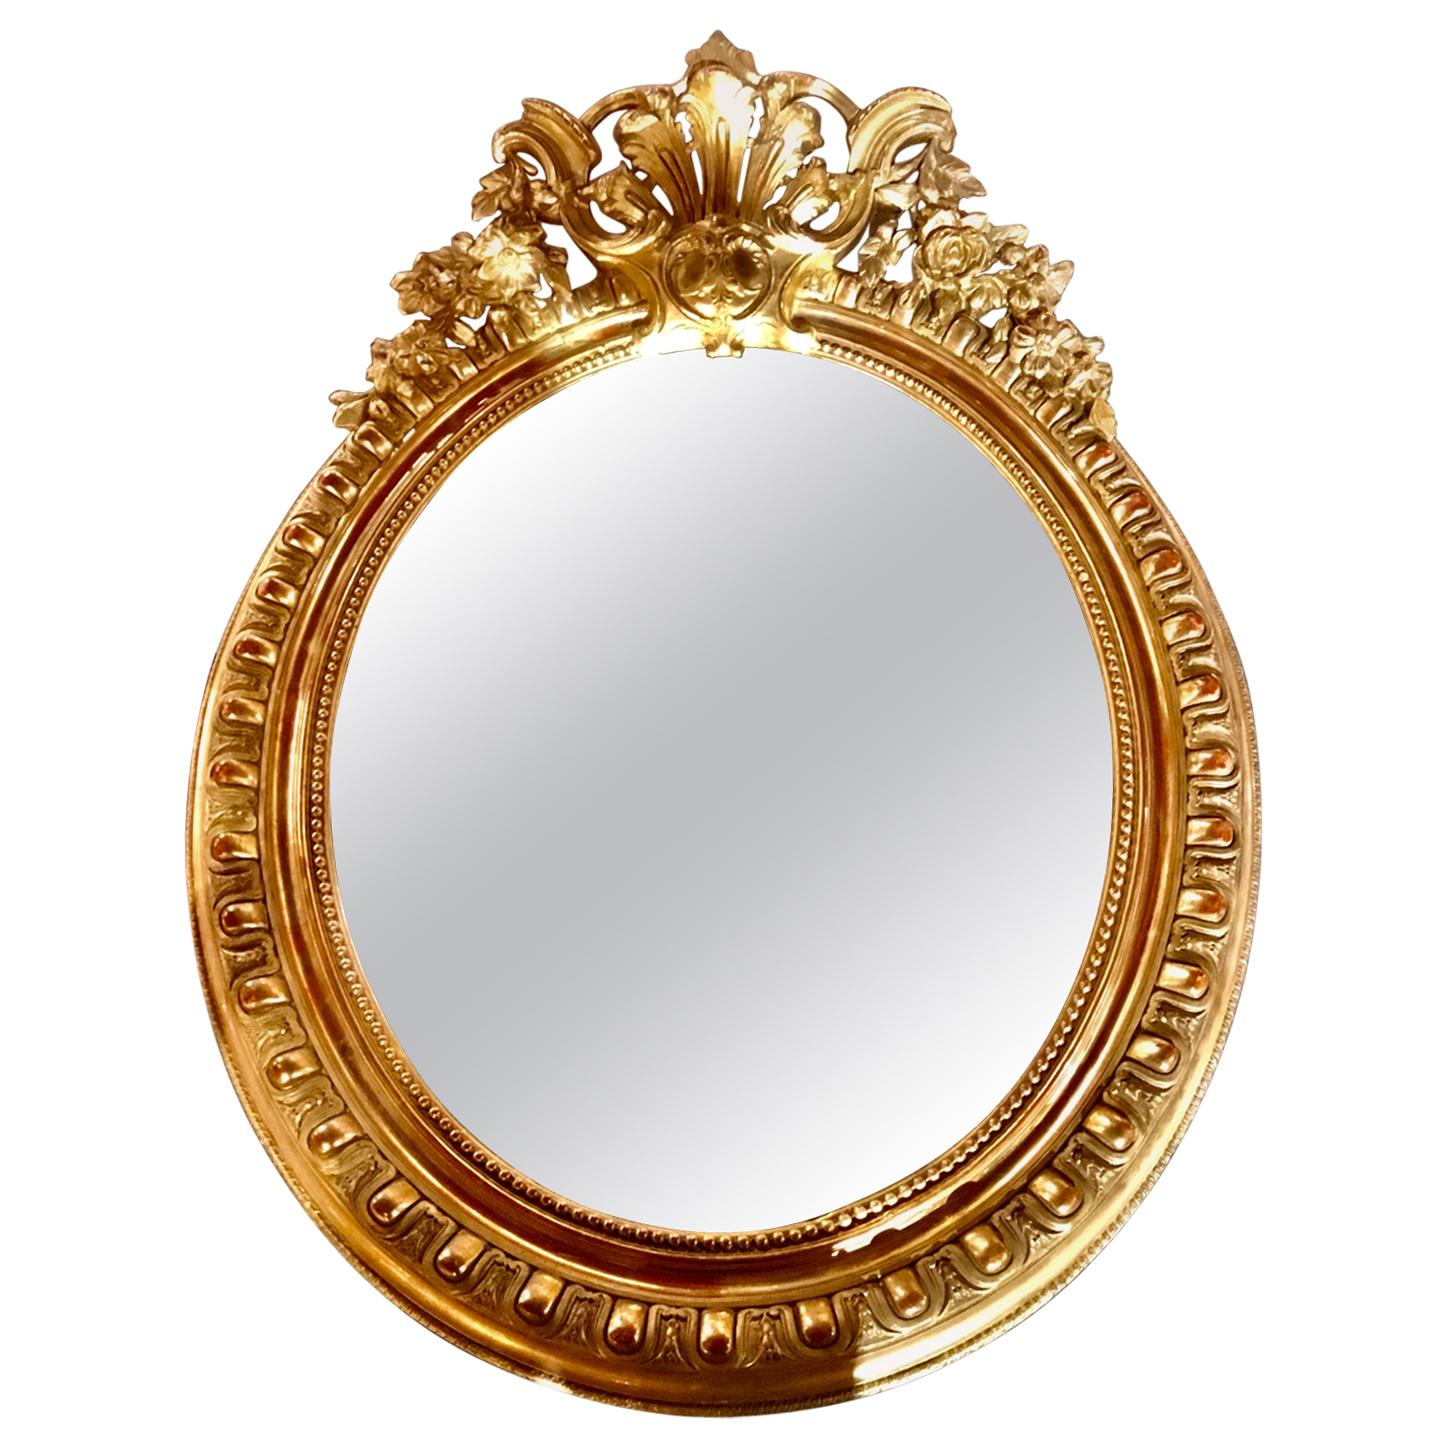 French Louis XV-Style Giltwood Oval Beveled Mirror, 19th Century